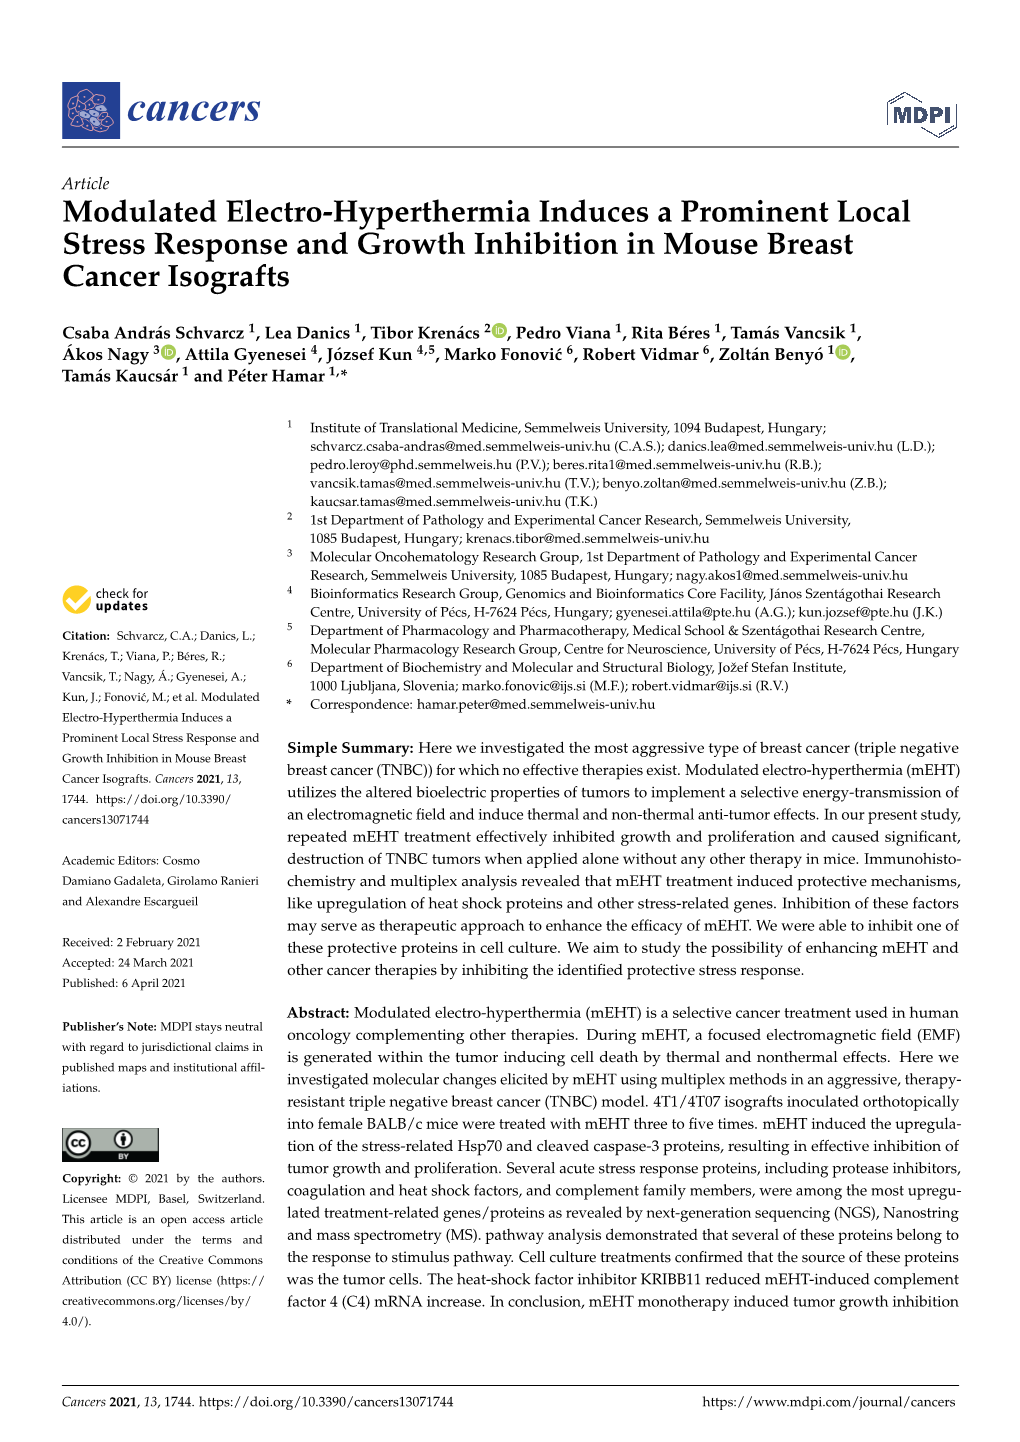 Modulated Electro-Hyperthermia Induces a Prominent Local Stress Response and Growth Inhibition in Mouse Breast Cancer Isografts